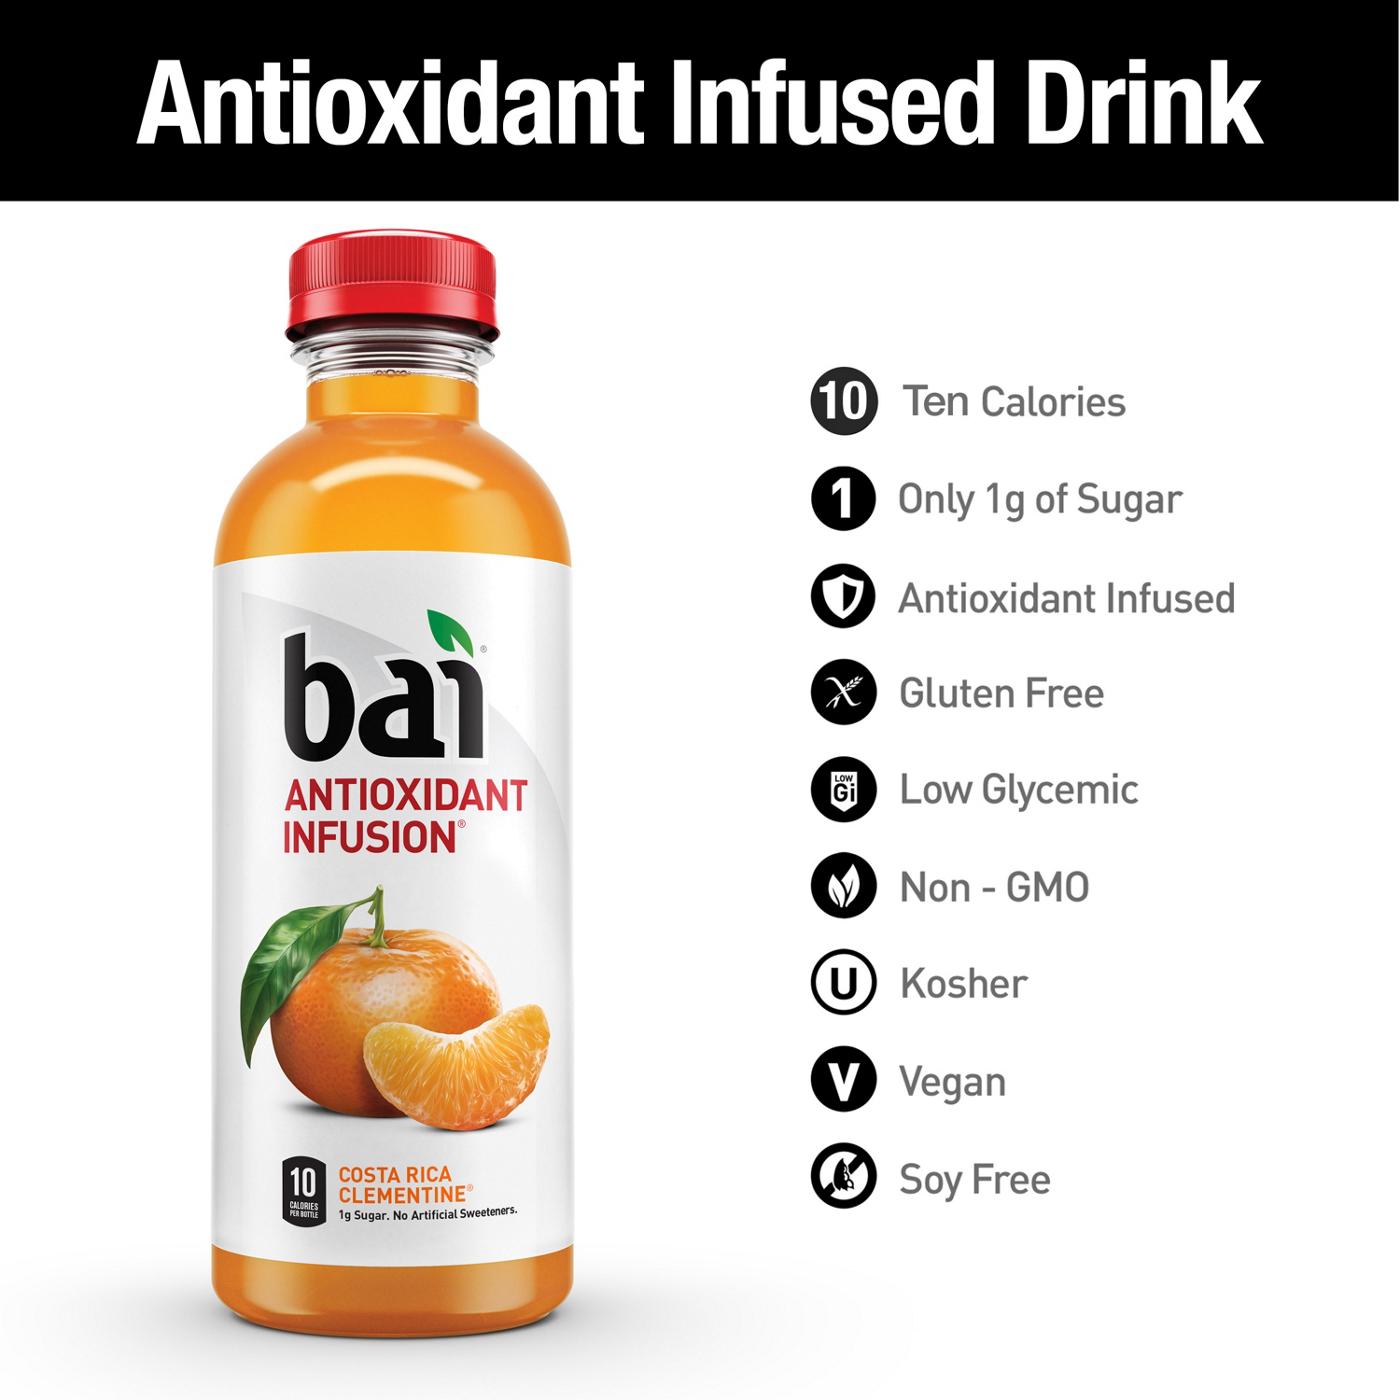 Bai 5 Antioxidant Infusions Costa Rica Clementine Beverage; image 4 of 4